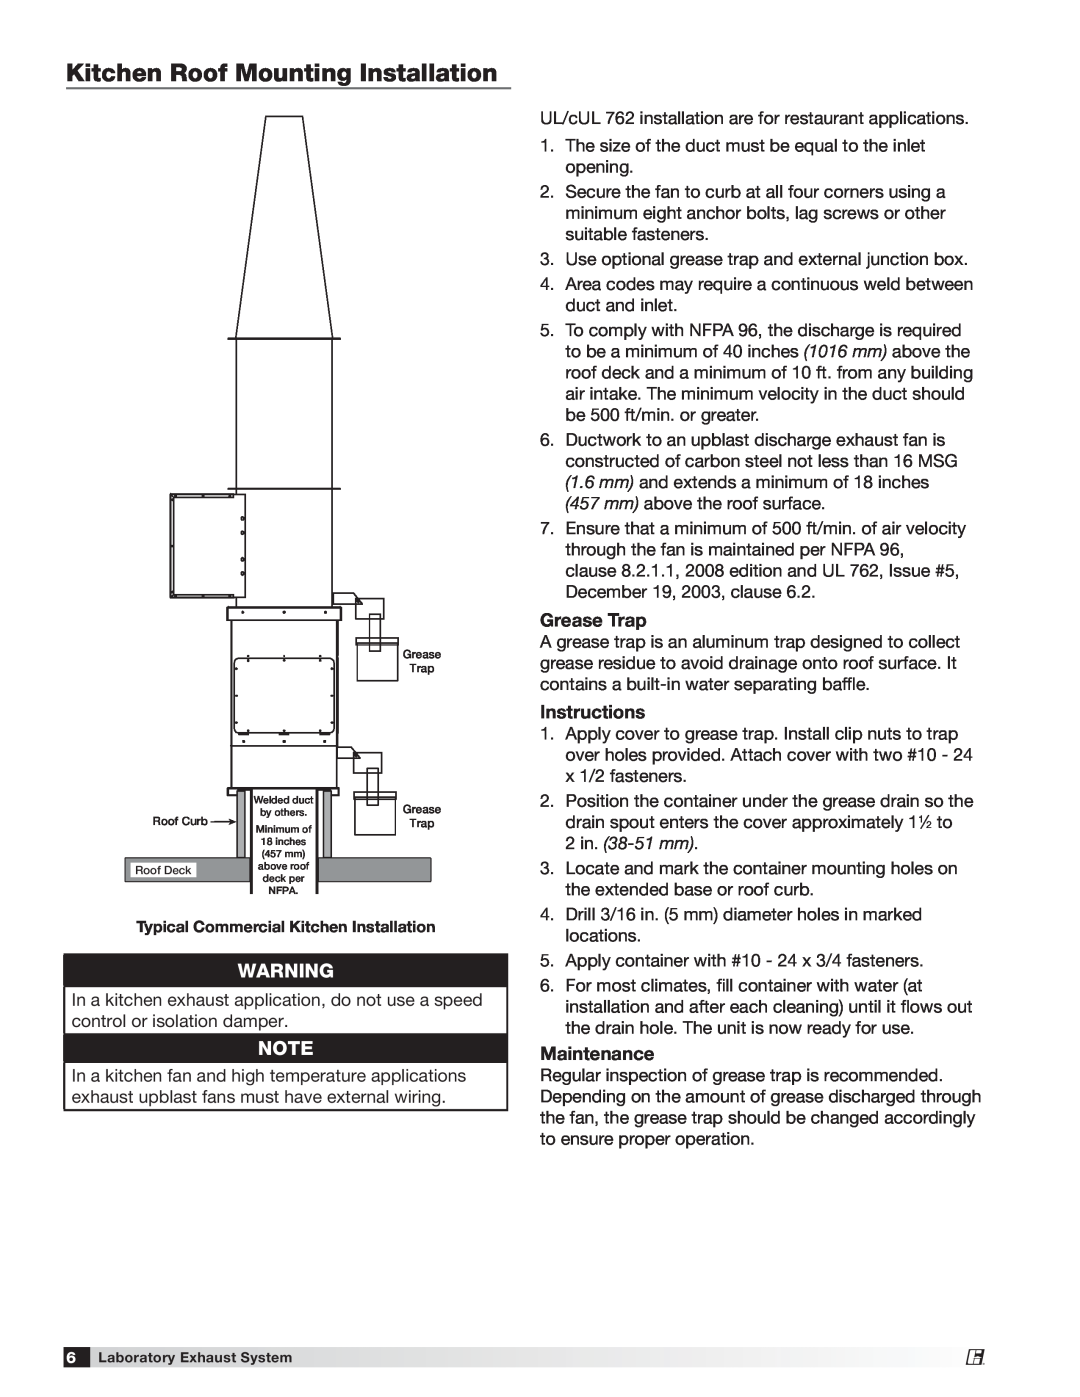 Greenheck Fan Vektor-H manual Kitchen Roof Mounting Installation, Grease Trap, Instructions, Maintenance, 2 in. 38-51 mm 